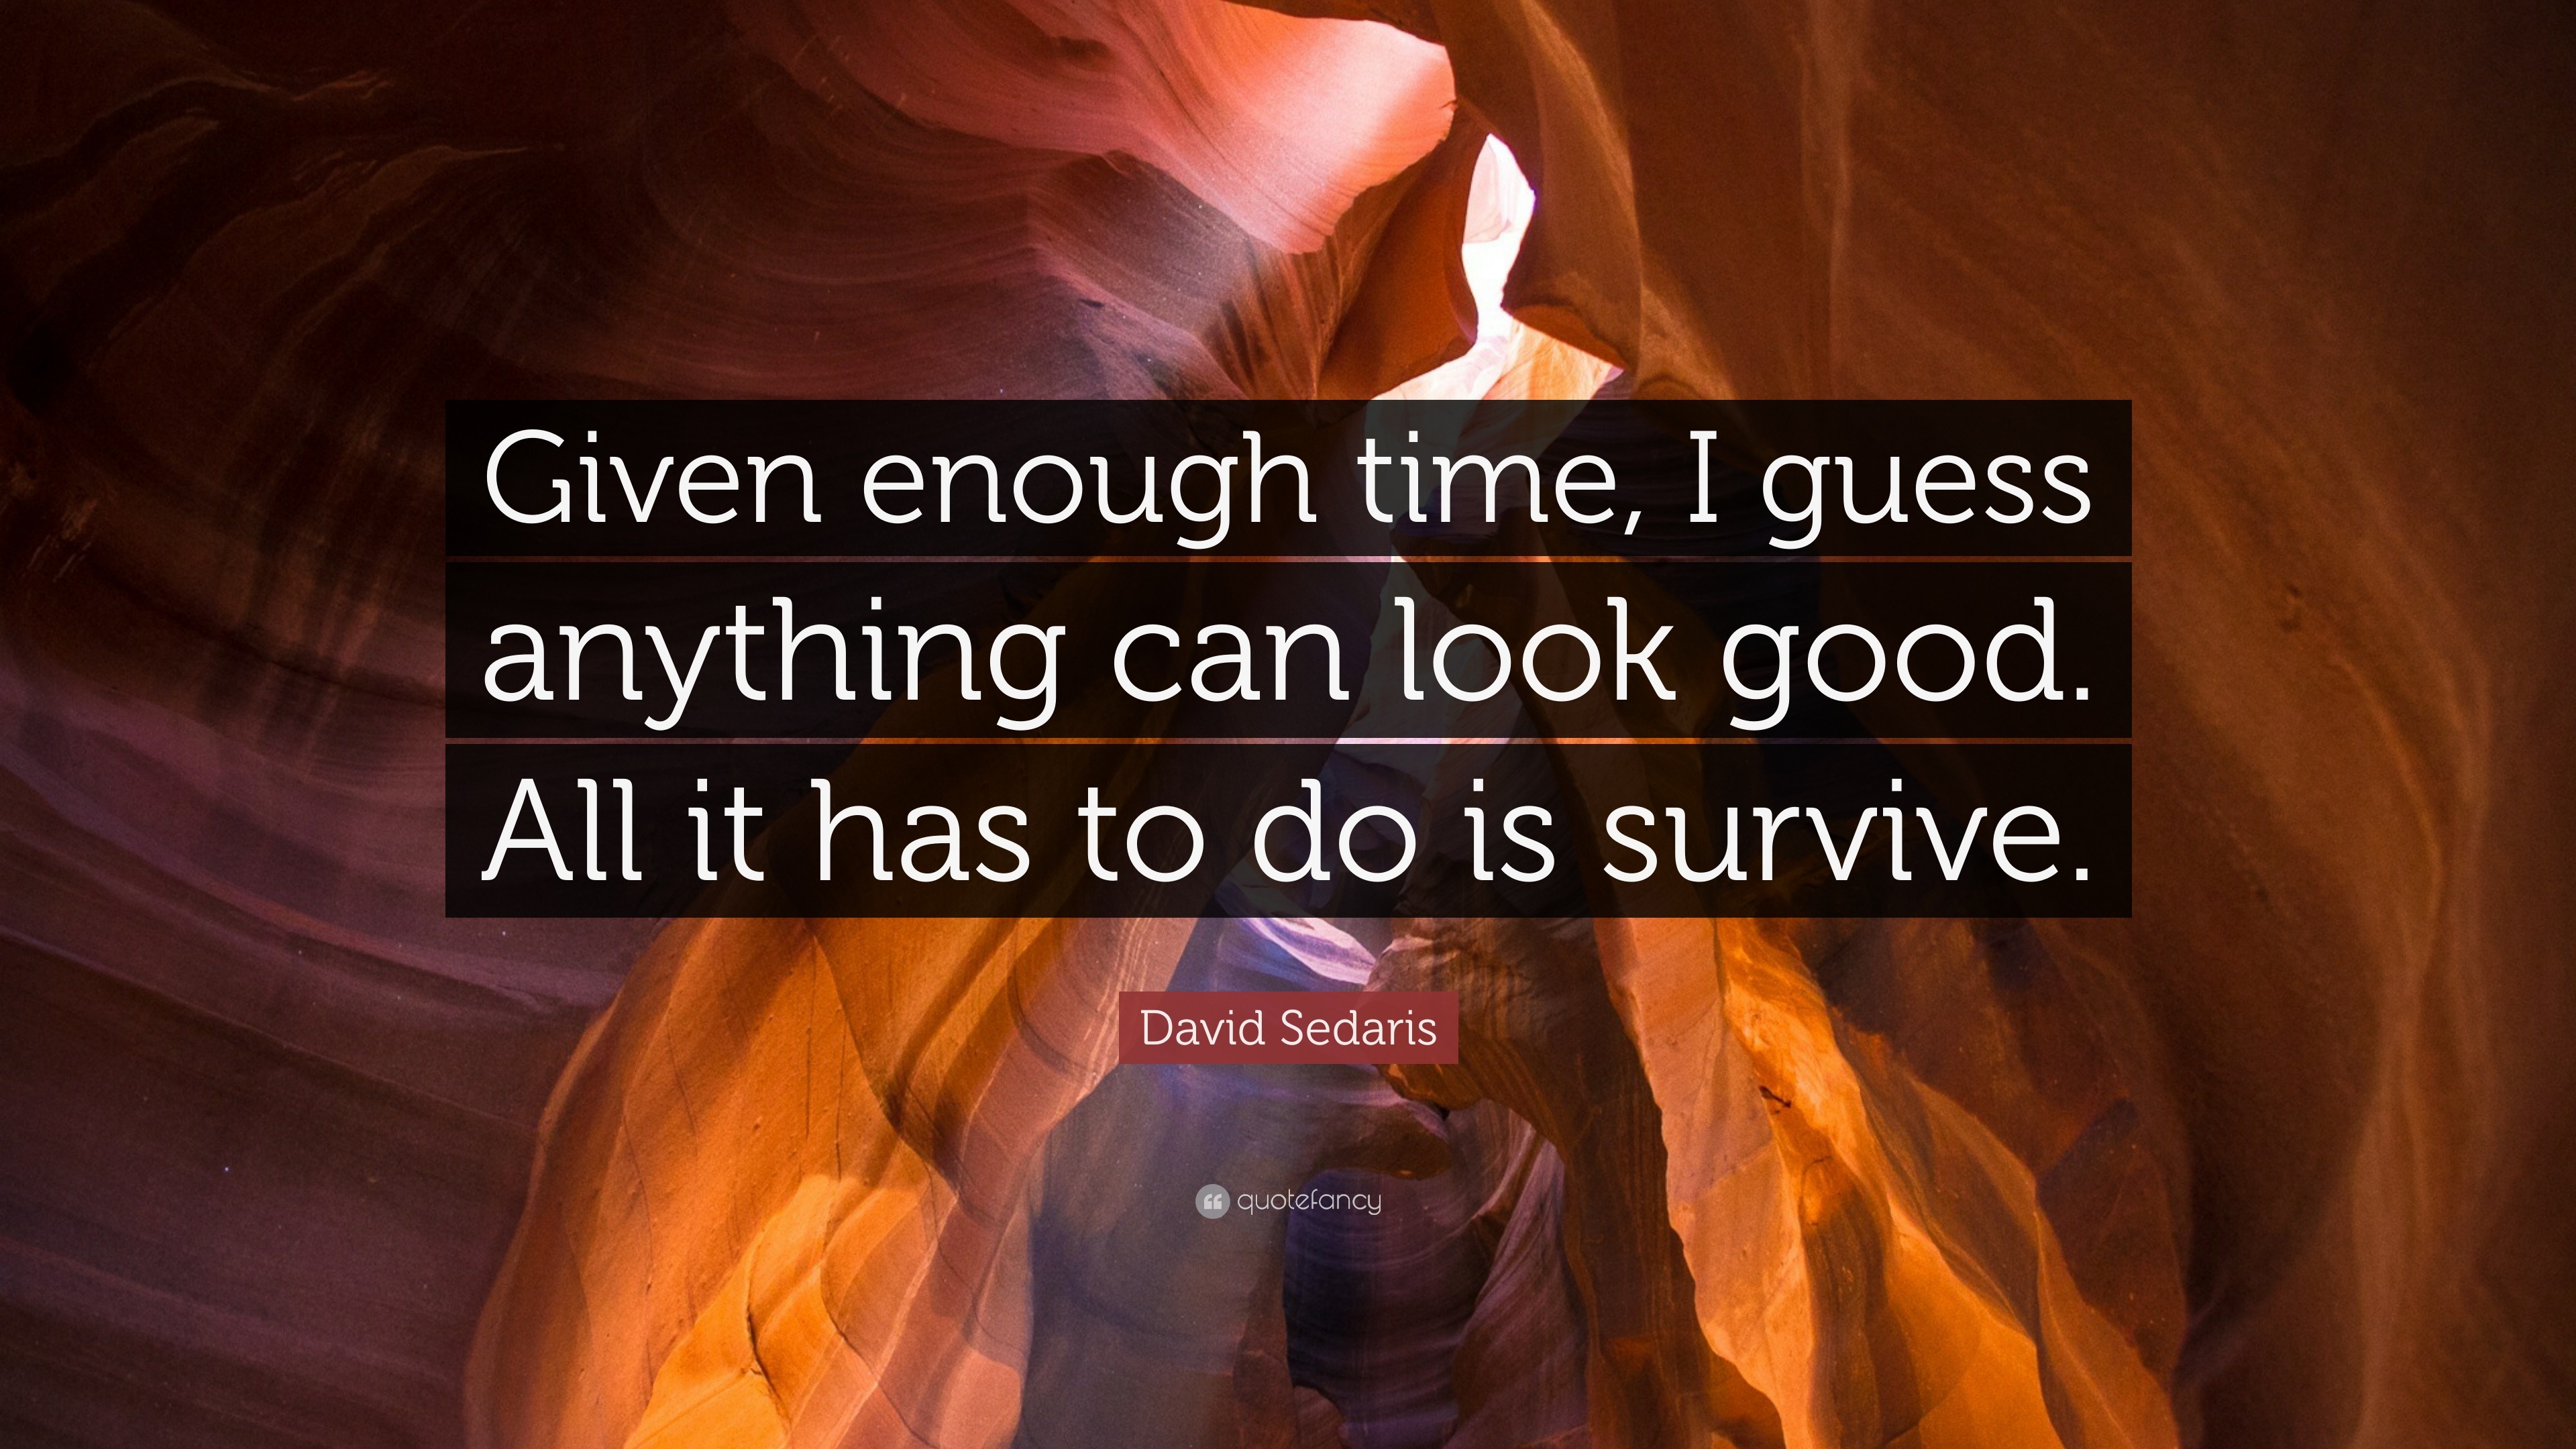 David Sedaris Quote: enough time, I guess anything can look good. All it has to